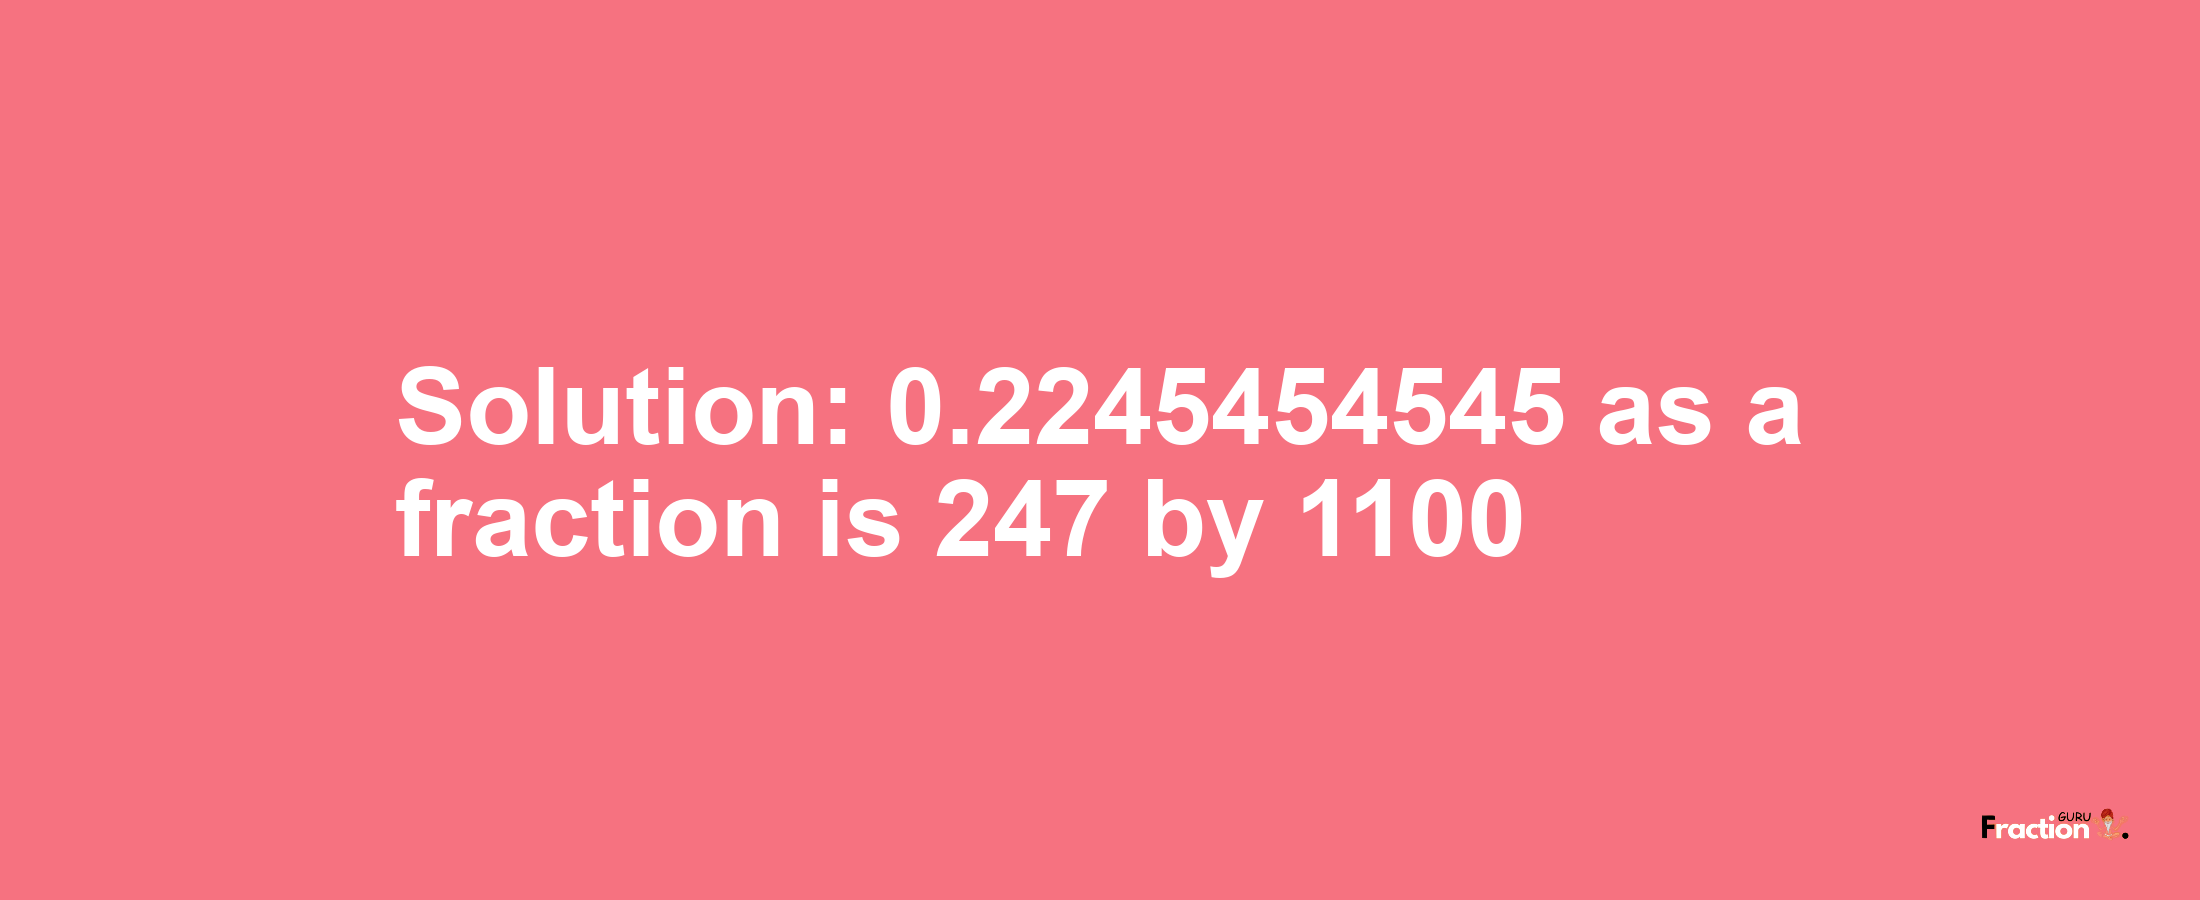 Solution:0.2245454545 as a fraction is 247/1100